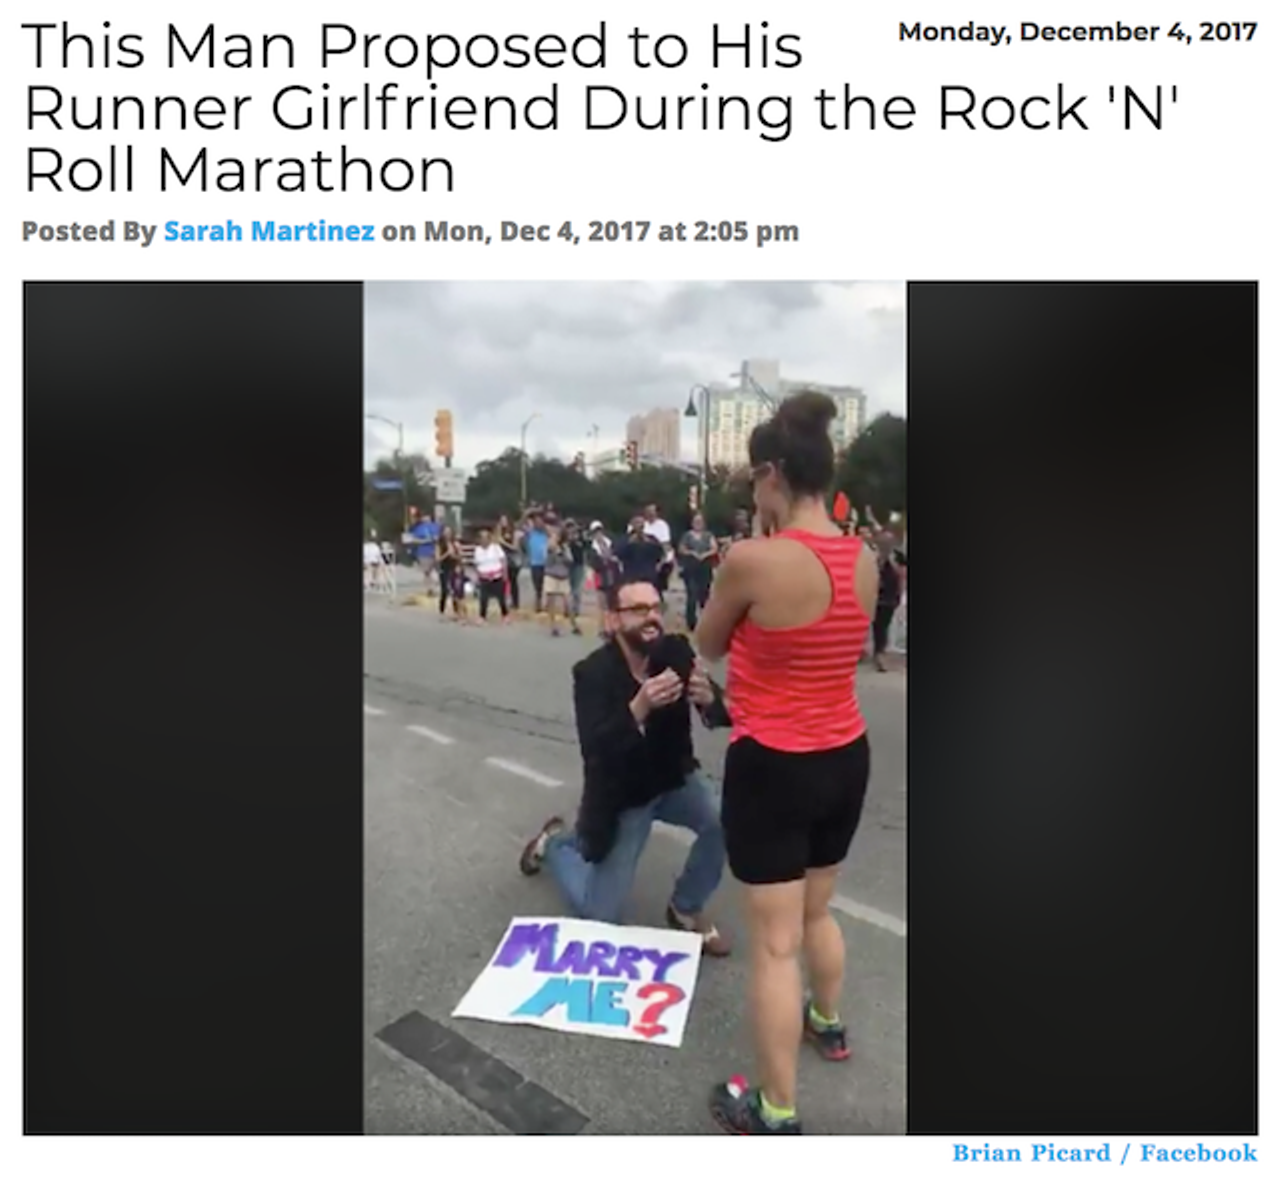 Brian Picard flew in from Oklahoma to sweetly propose to his girlfriend, Catherine Pisano, at the Rock ‘n Roll Marathon. Spoiler: she said yes. Read more.